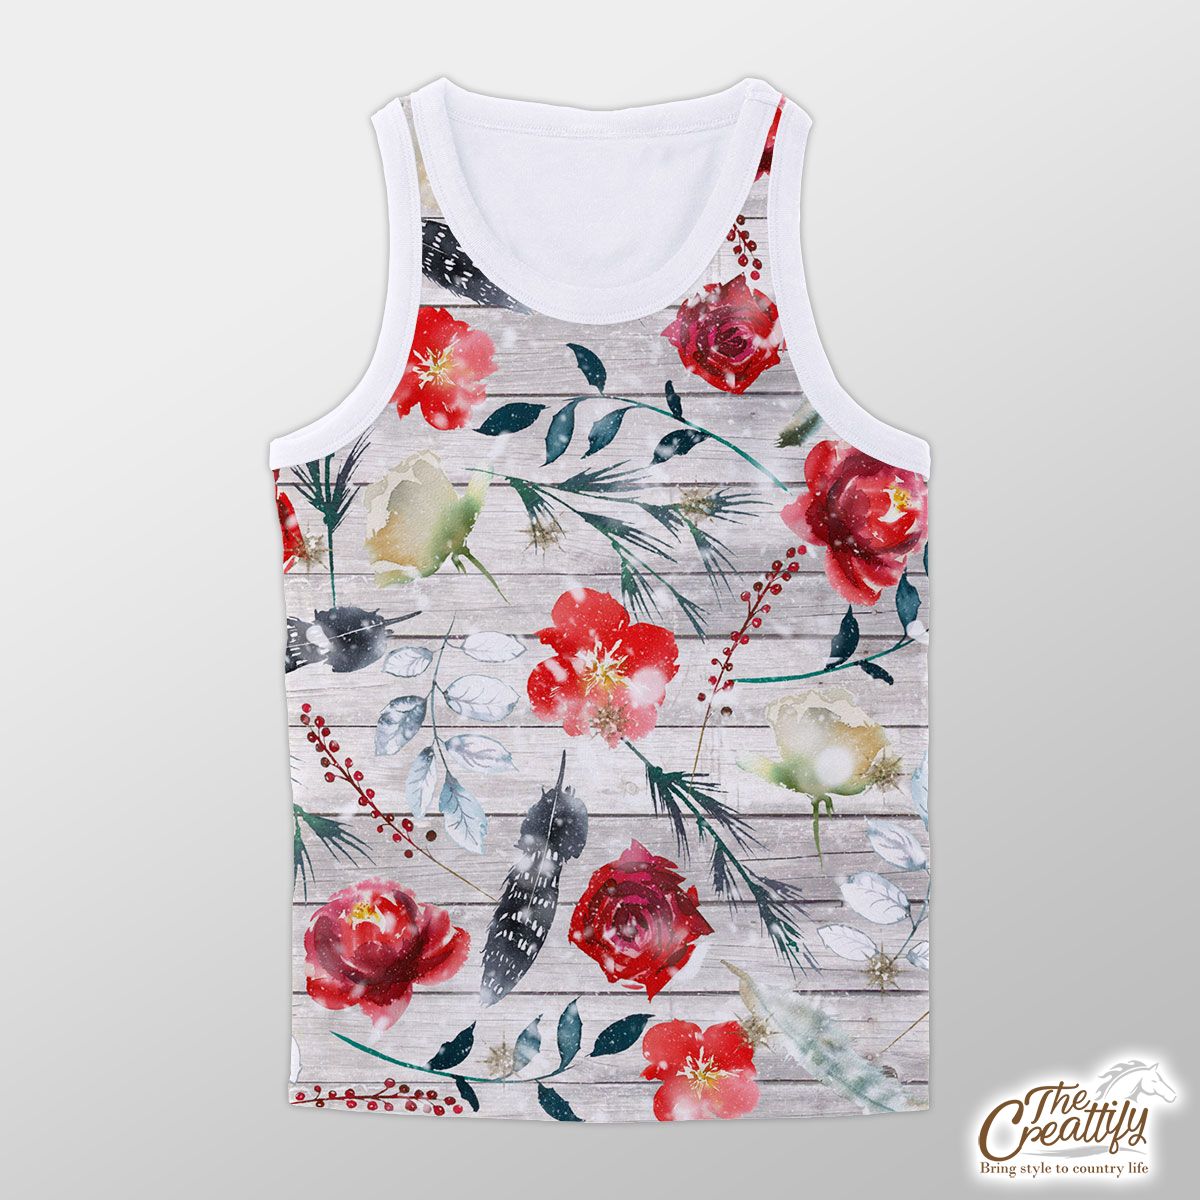 Florals With Red Berries Pattern Unisex Tank Top